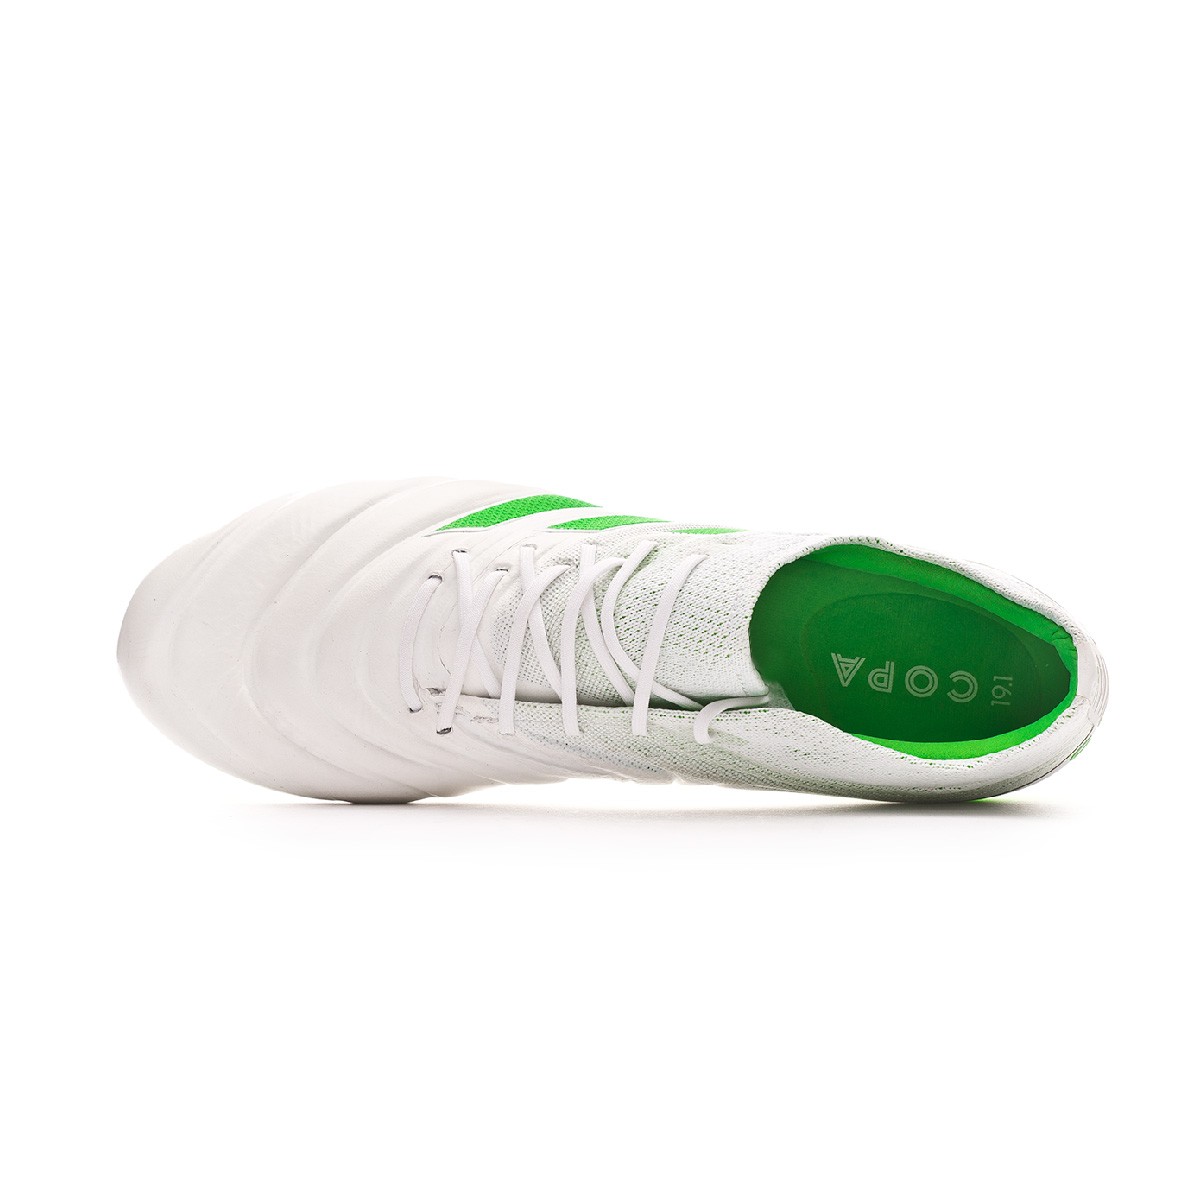 adidas copa 19.1 green and white